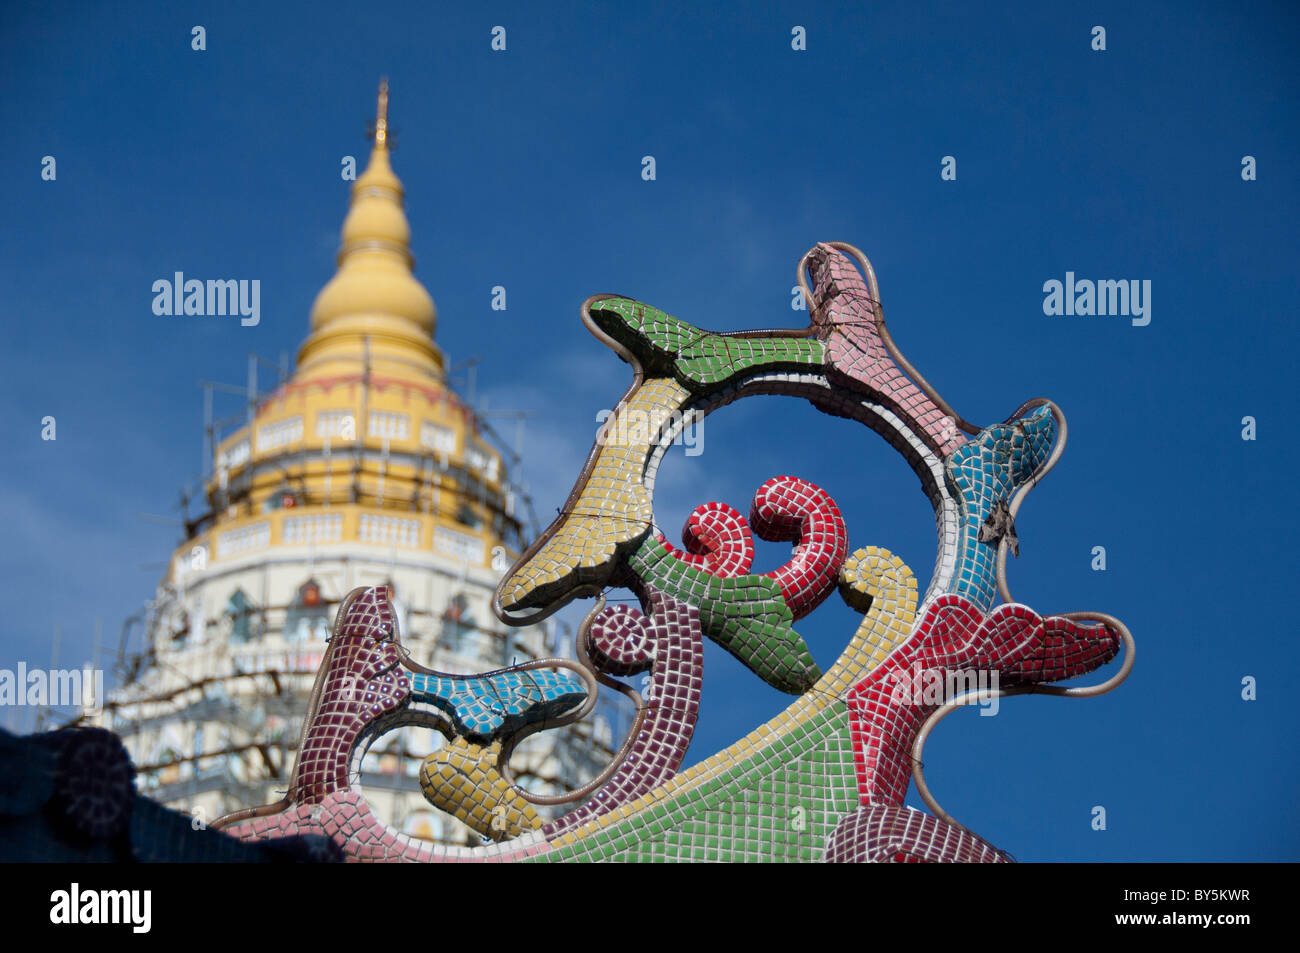 Malaysia, Island of Penang. Kek Lok Si Temple, ornate temple detail with main pagoda in distance. Stock Photo